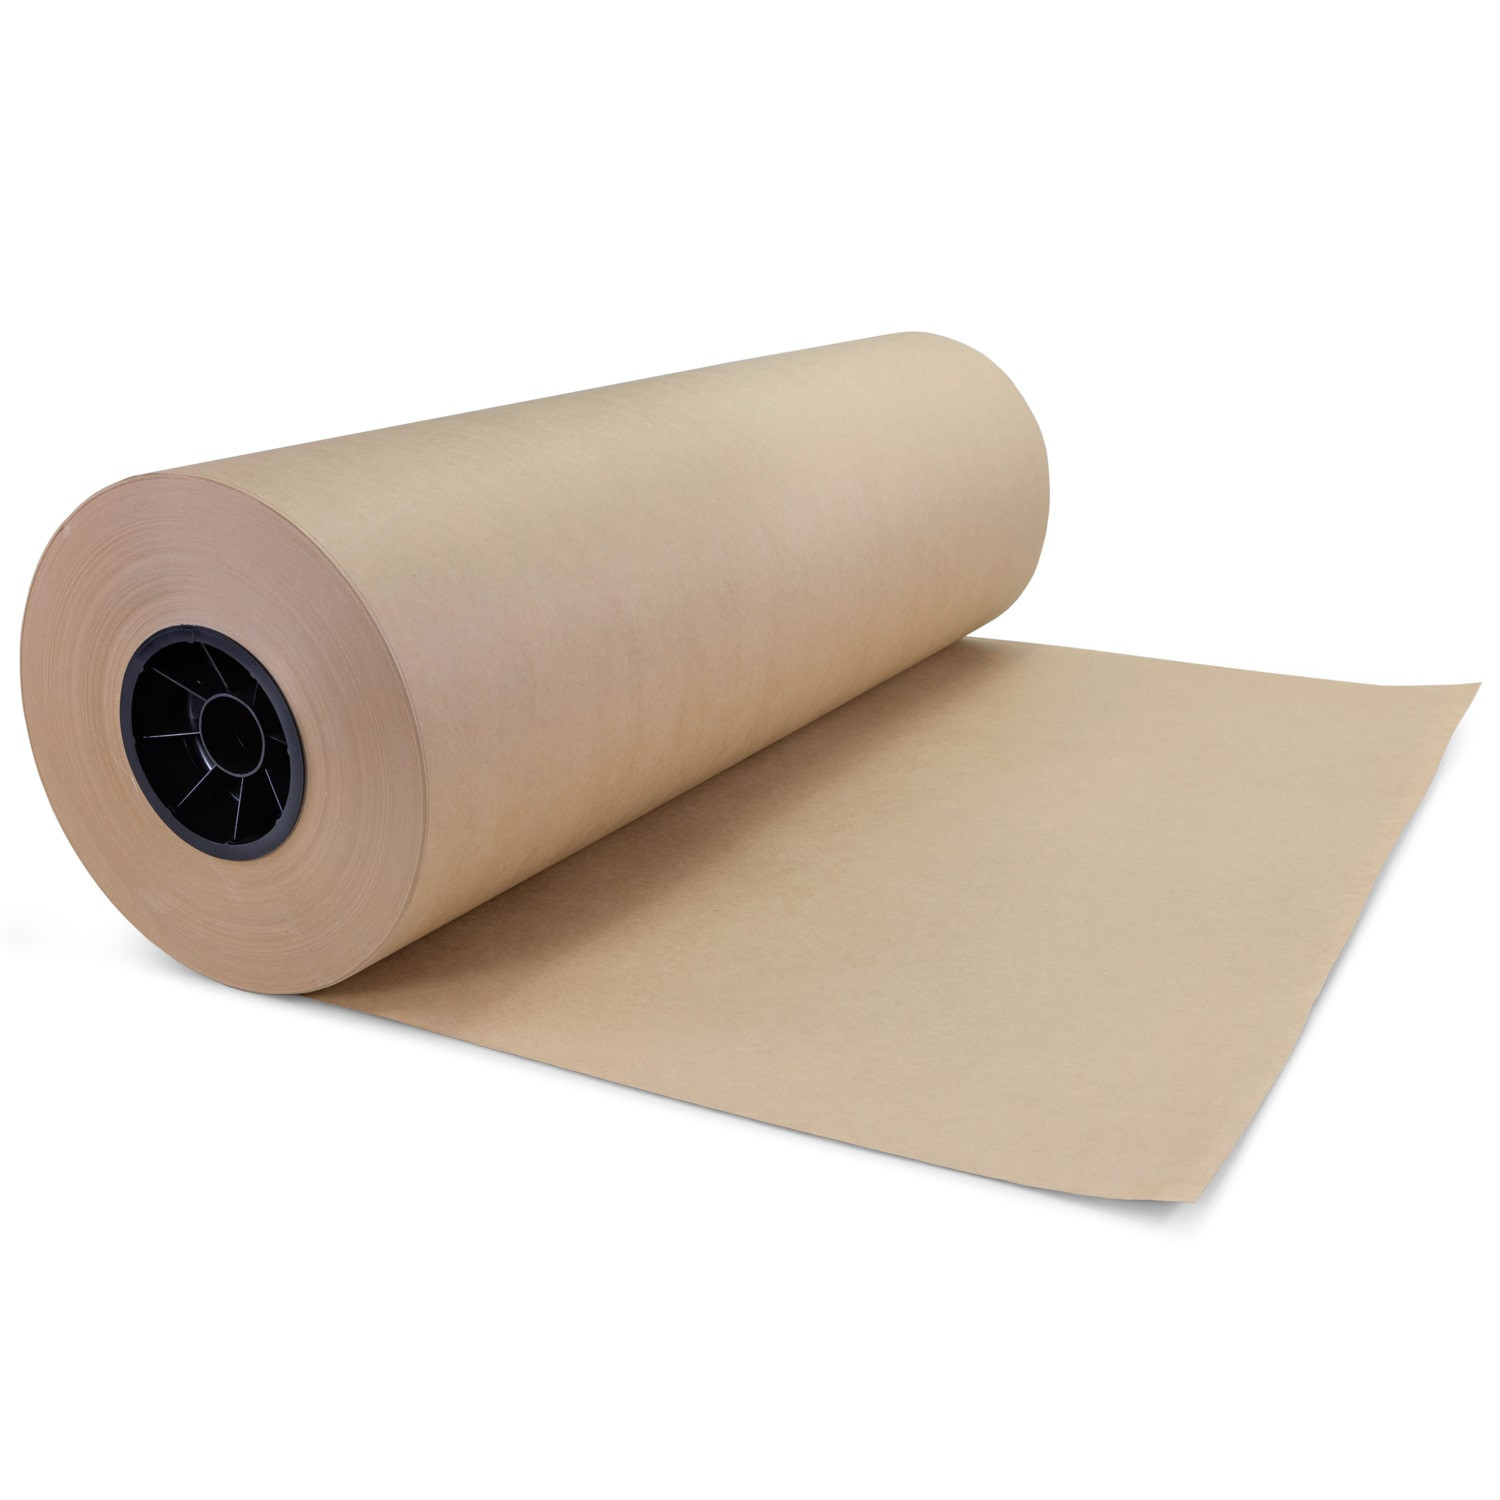 Box USA Newsprint Packing Paper Roll, 1440' Length x 24 Width, 100% Recycled, White, Great for Moving, Storing, and Packing